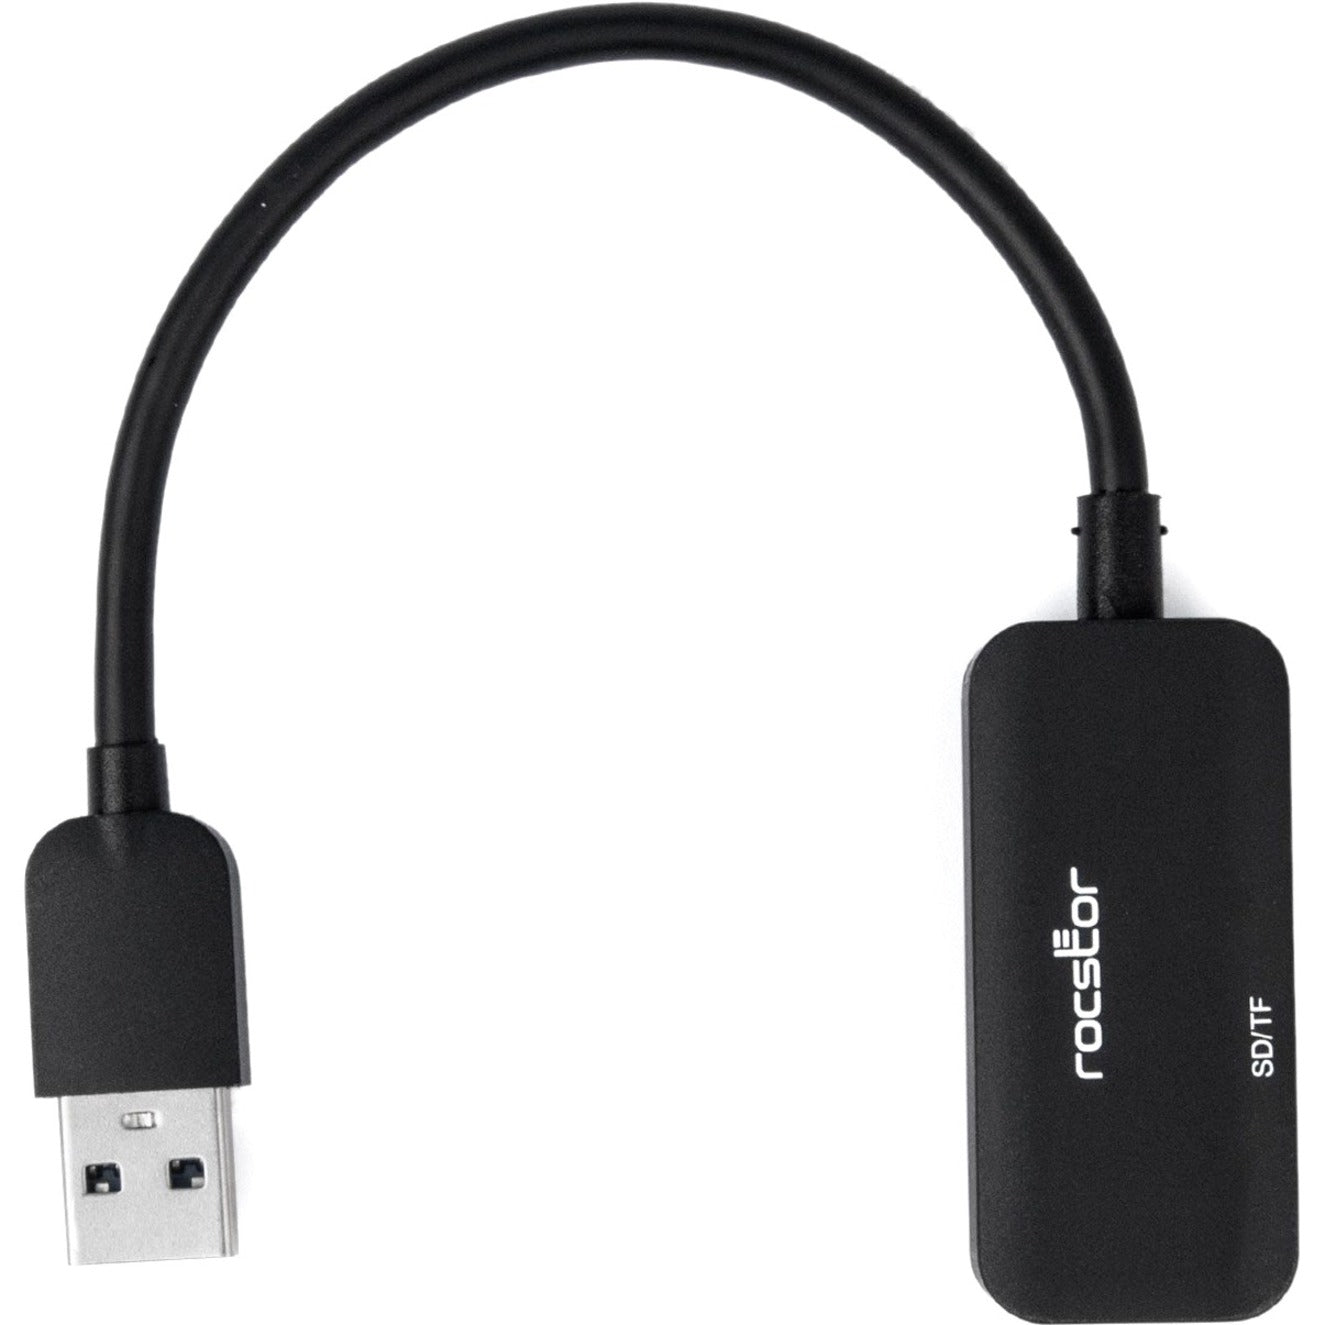 Rocstor Y10A253-B1 Premium USB 3.0 Multi Media Memory Card Reader, High-Speed Data Transfer and Easy File Management